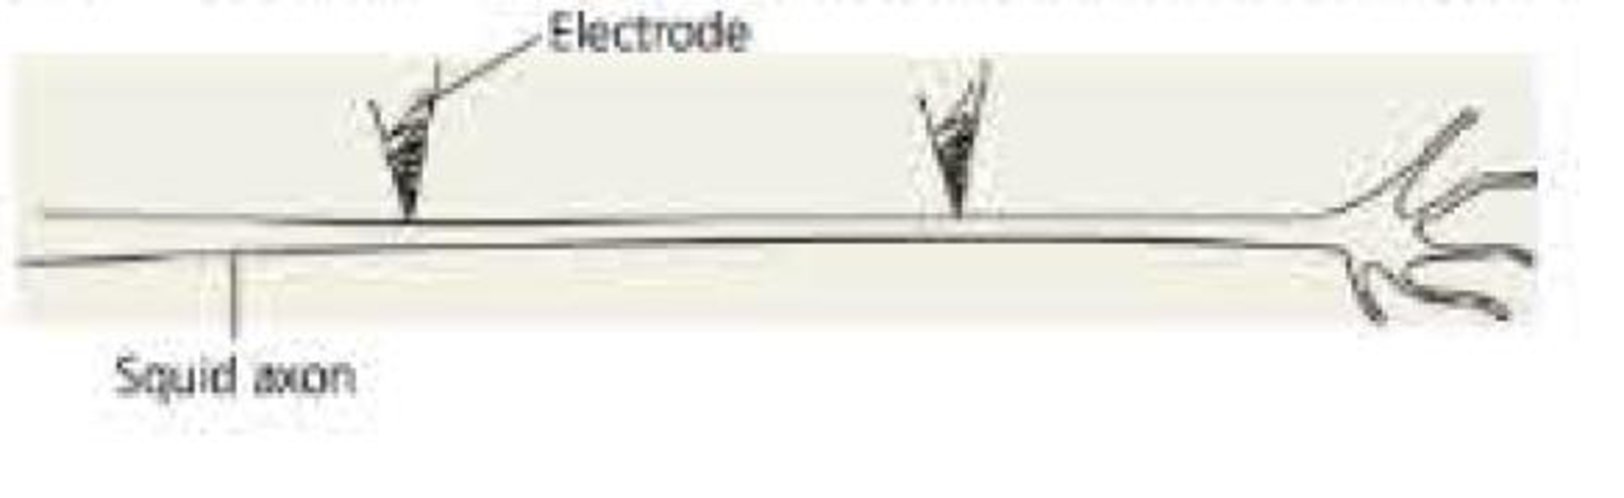 Chapter 37, Problem 9TYU, DRAW IT Suppose a researcher inserts a pair of electrodes at two different positions along the 